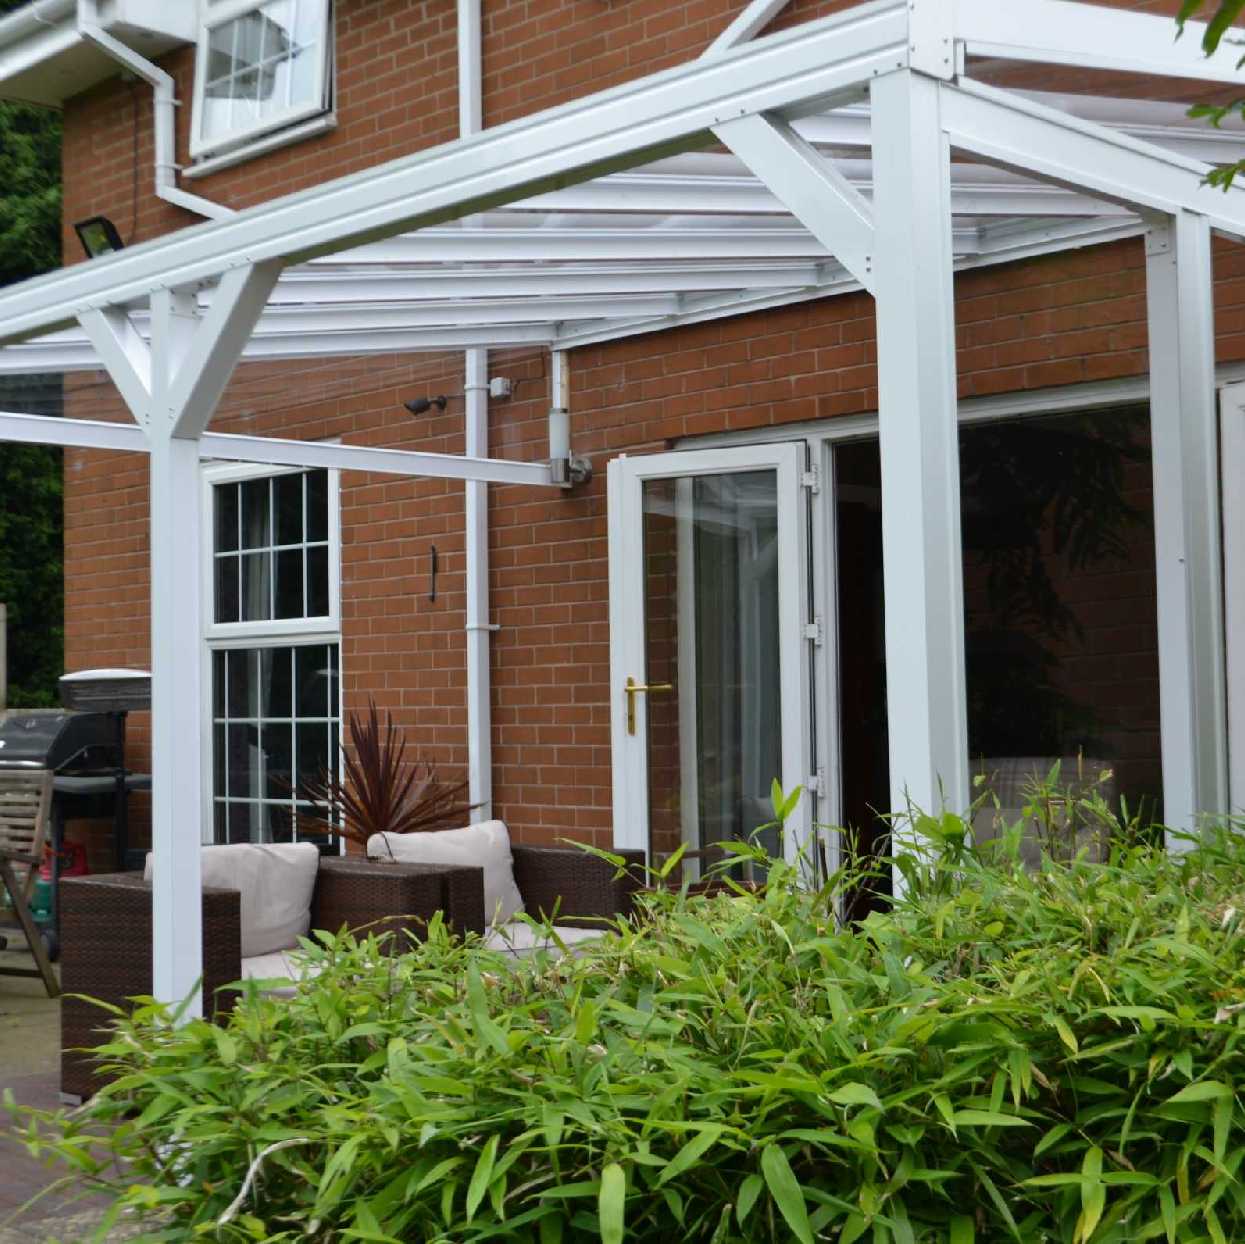 Omega Smart Lean-To Canopy, White UNGLAZED for 6mm Glazing - 4.2m (W) x 2.5m (P), (3) Supporting Posts from Omega Build